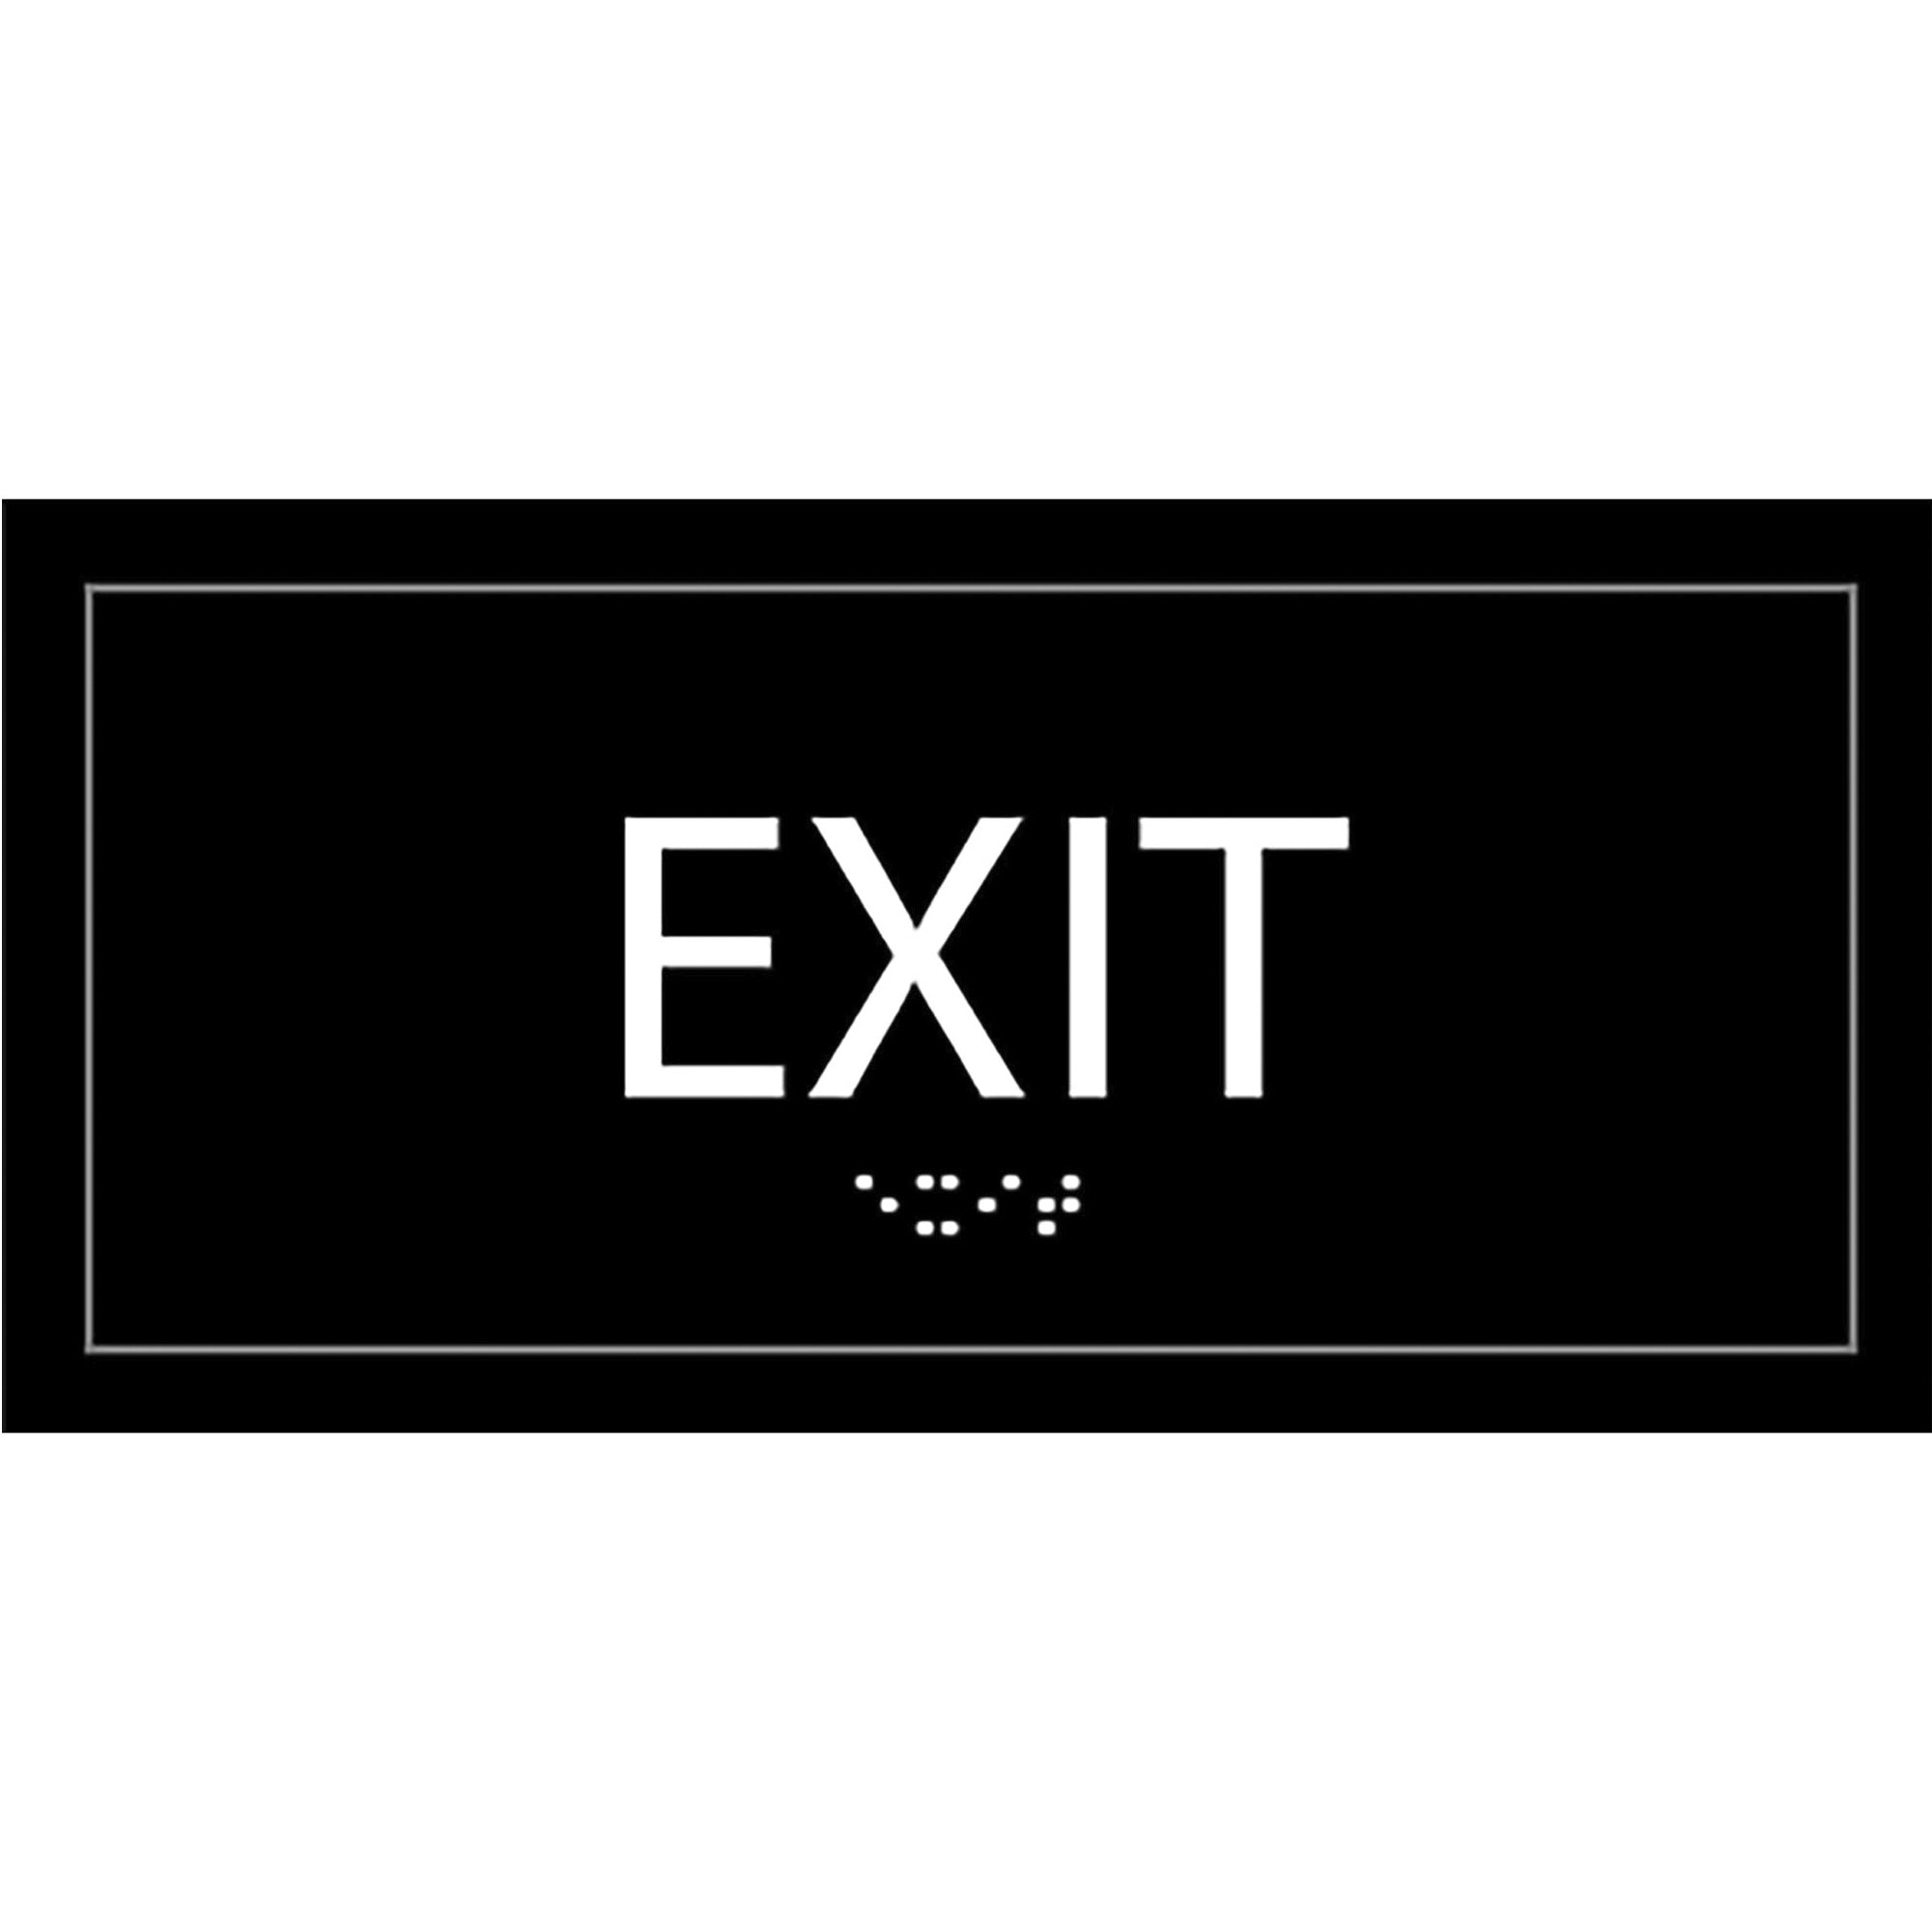 lorell-exit-sign-1-each-4-width-x-8-height-rectangular-shape-surface-mountable-easy-readability-injection-molded-plastic-black_llr02662 - 1